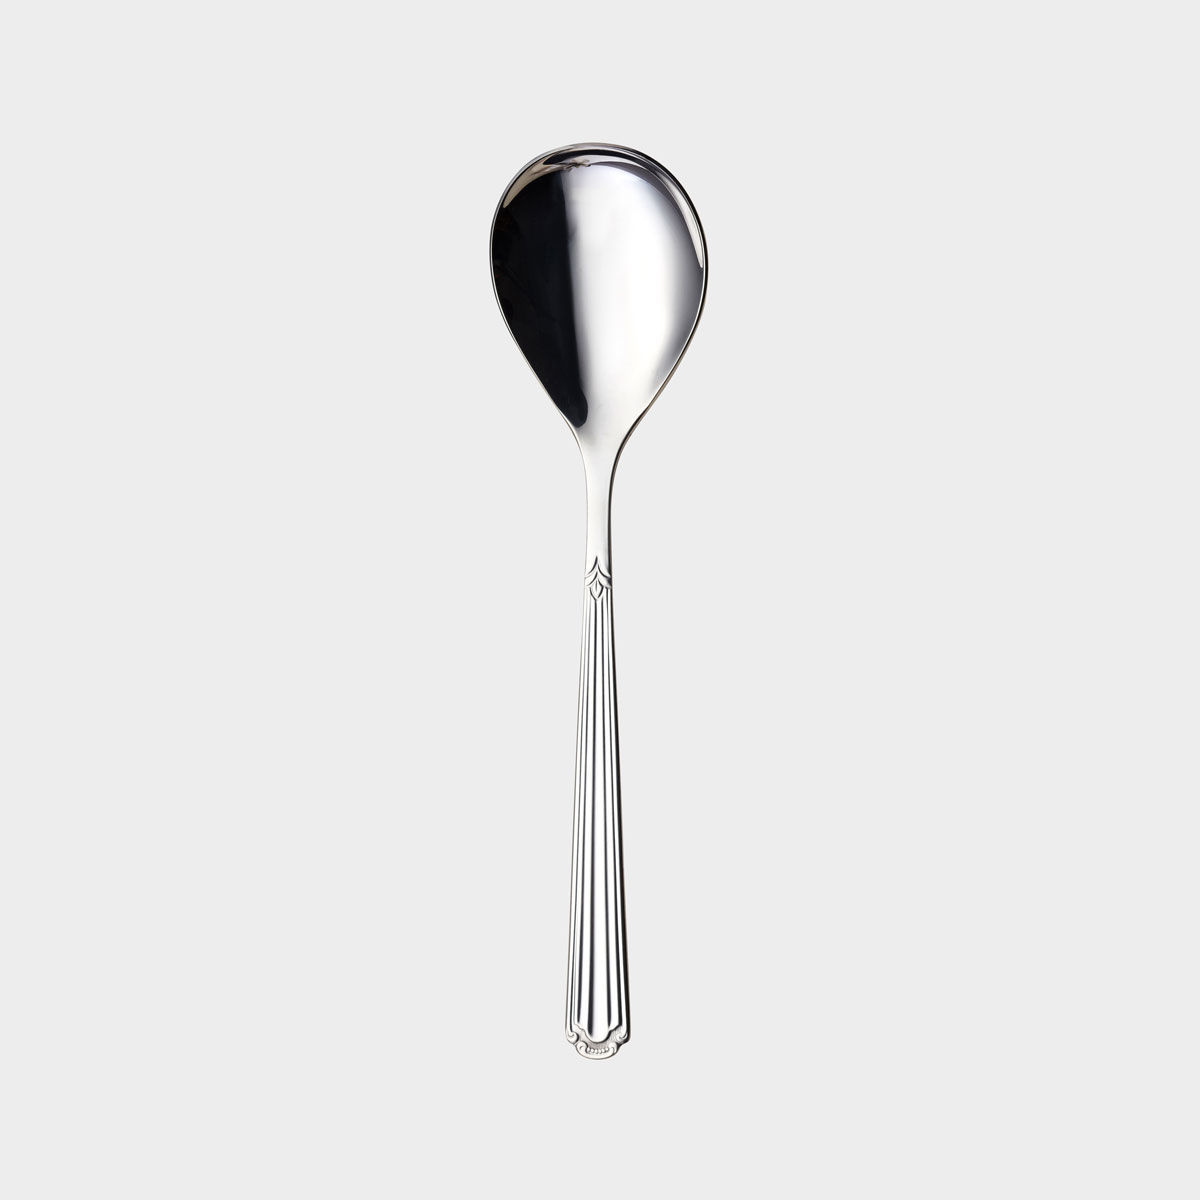 Renessanse serving spoon product image